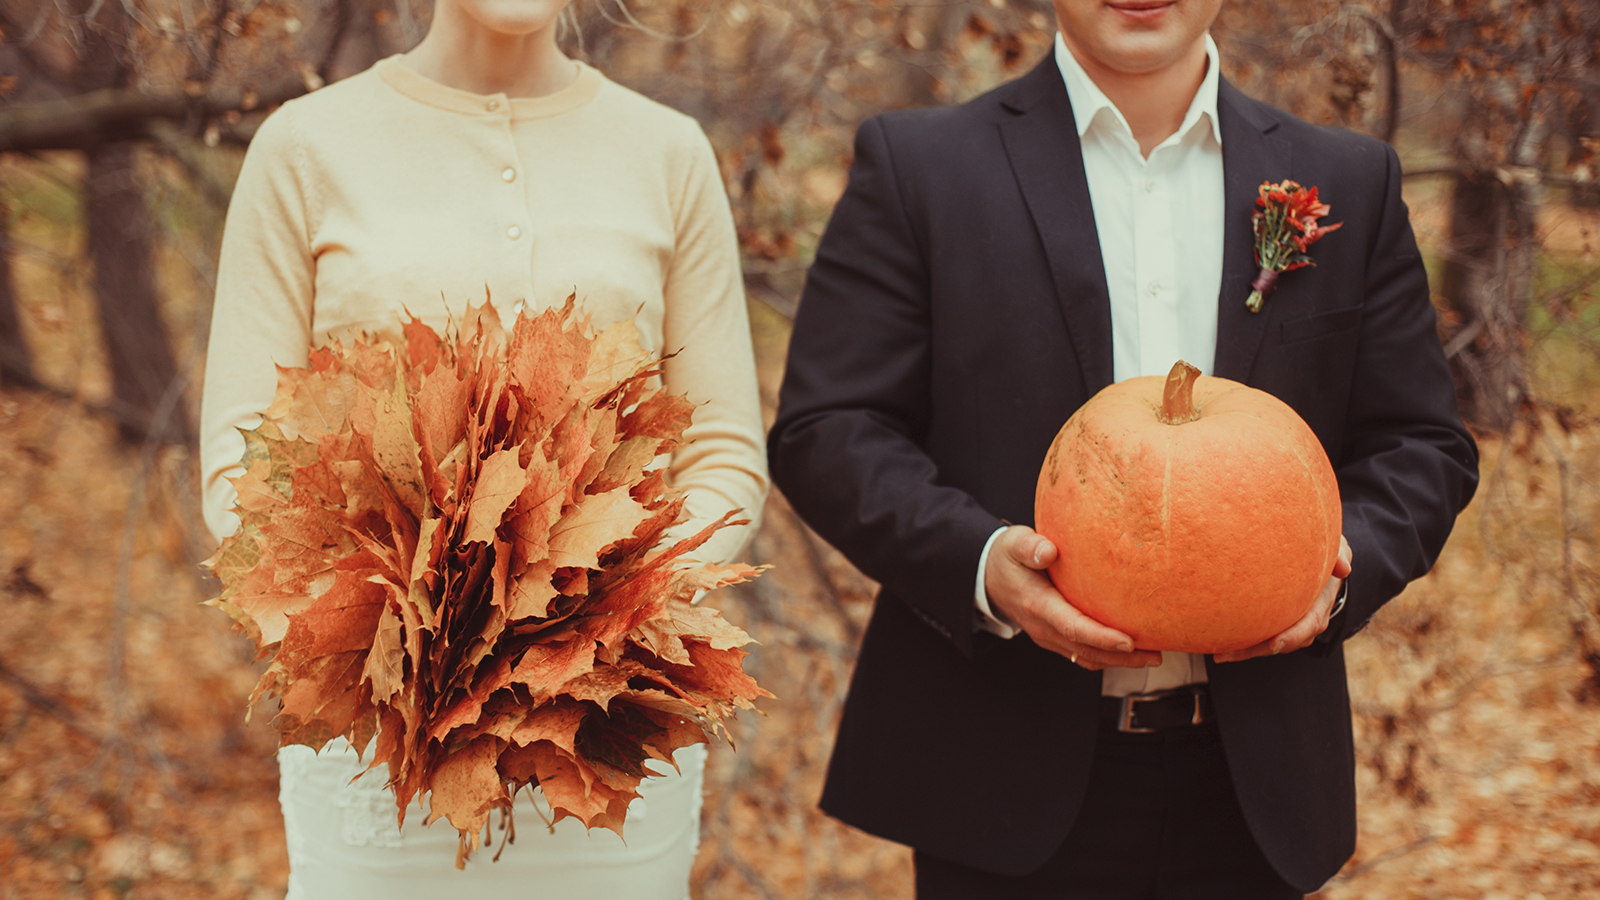 Autumn wedding. The groom is holding an orange pumpkin, the bride is holding a bouquet of autumn leaves. Foliage with pumpkin. High quality photo. Thanksgiving or Halloween concept banner or postcard.